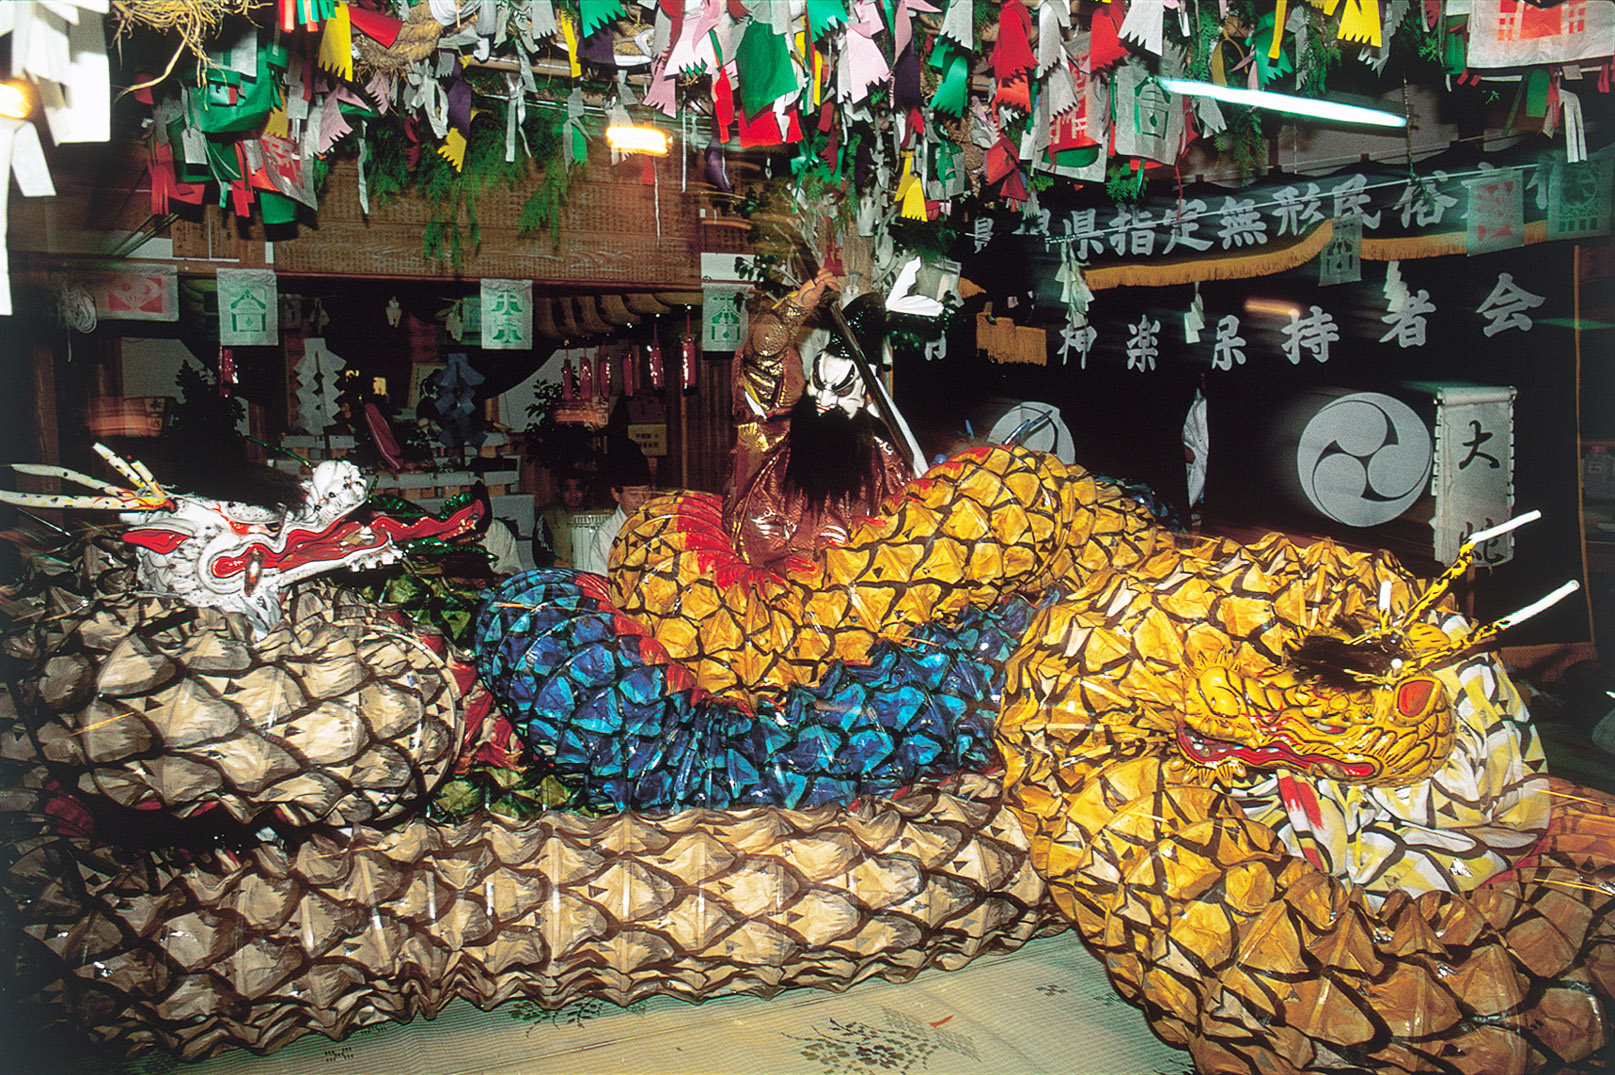 Yamata no Orochi — Part of the program of Iwami Kagura (a sacred Japanese dance and music ritual dedicated to the gods of Shinto) in Shimane Prefecture depicts the scene of Susanoo defeating the giant snake Orochi.